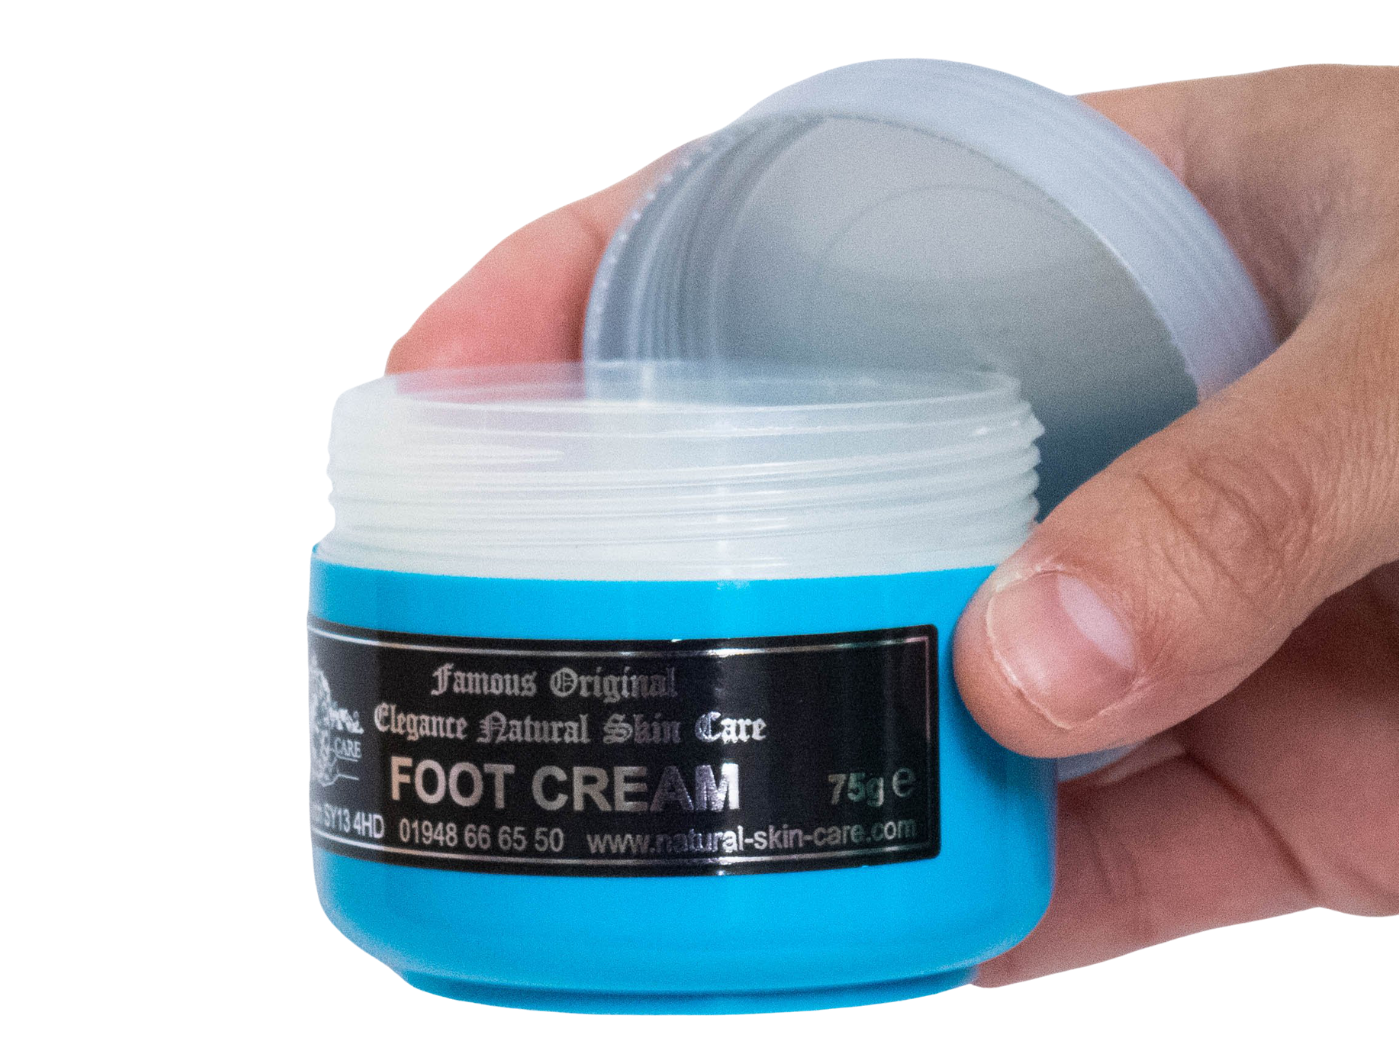 Proven Dead Skin Removal Foot Cream Products for Elegance 